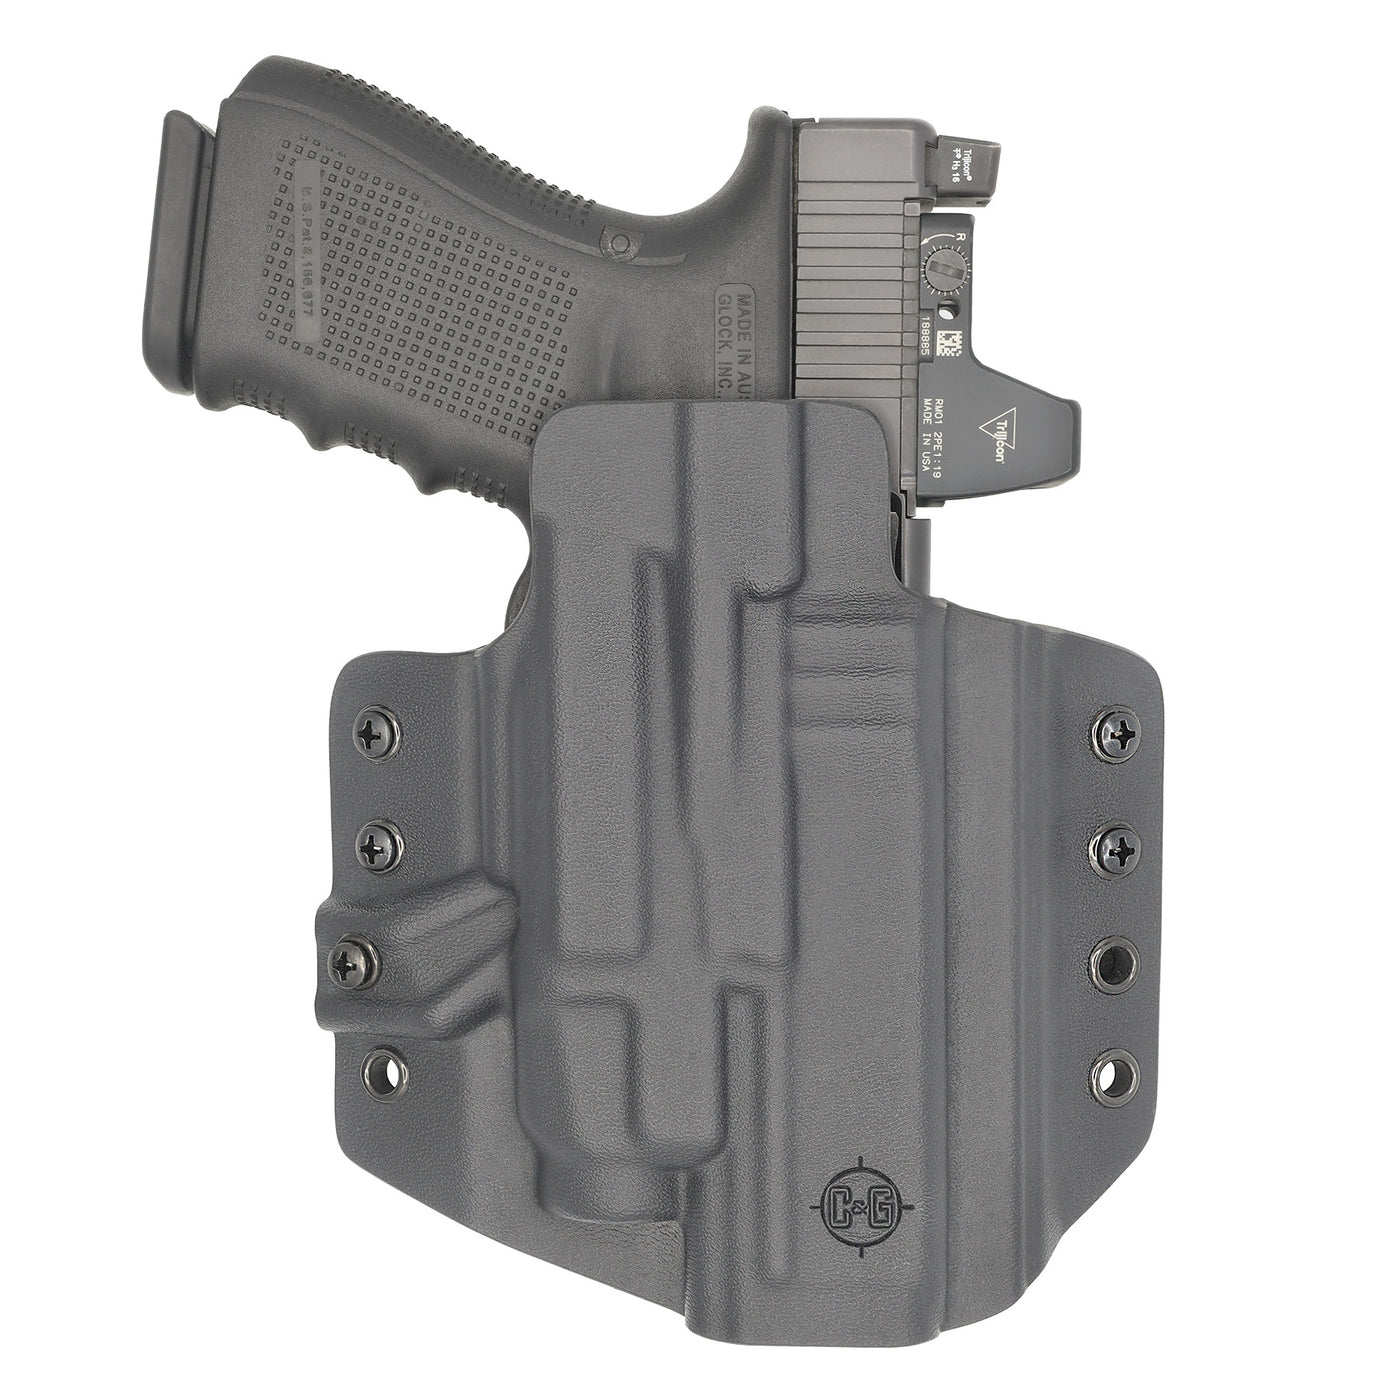 C&G Holsters custom OWB Tactical Glock 20/21 streamlight TLR7/a in holstered position